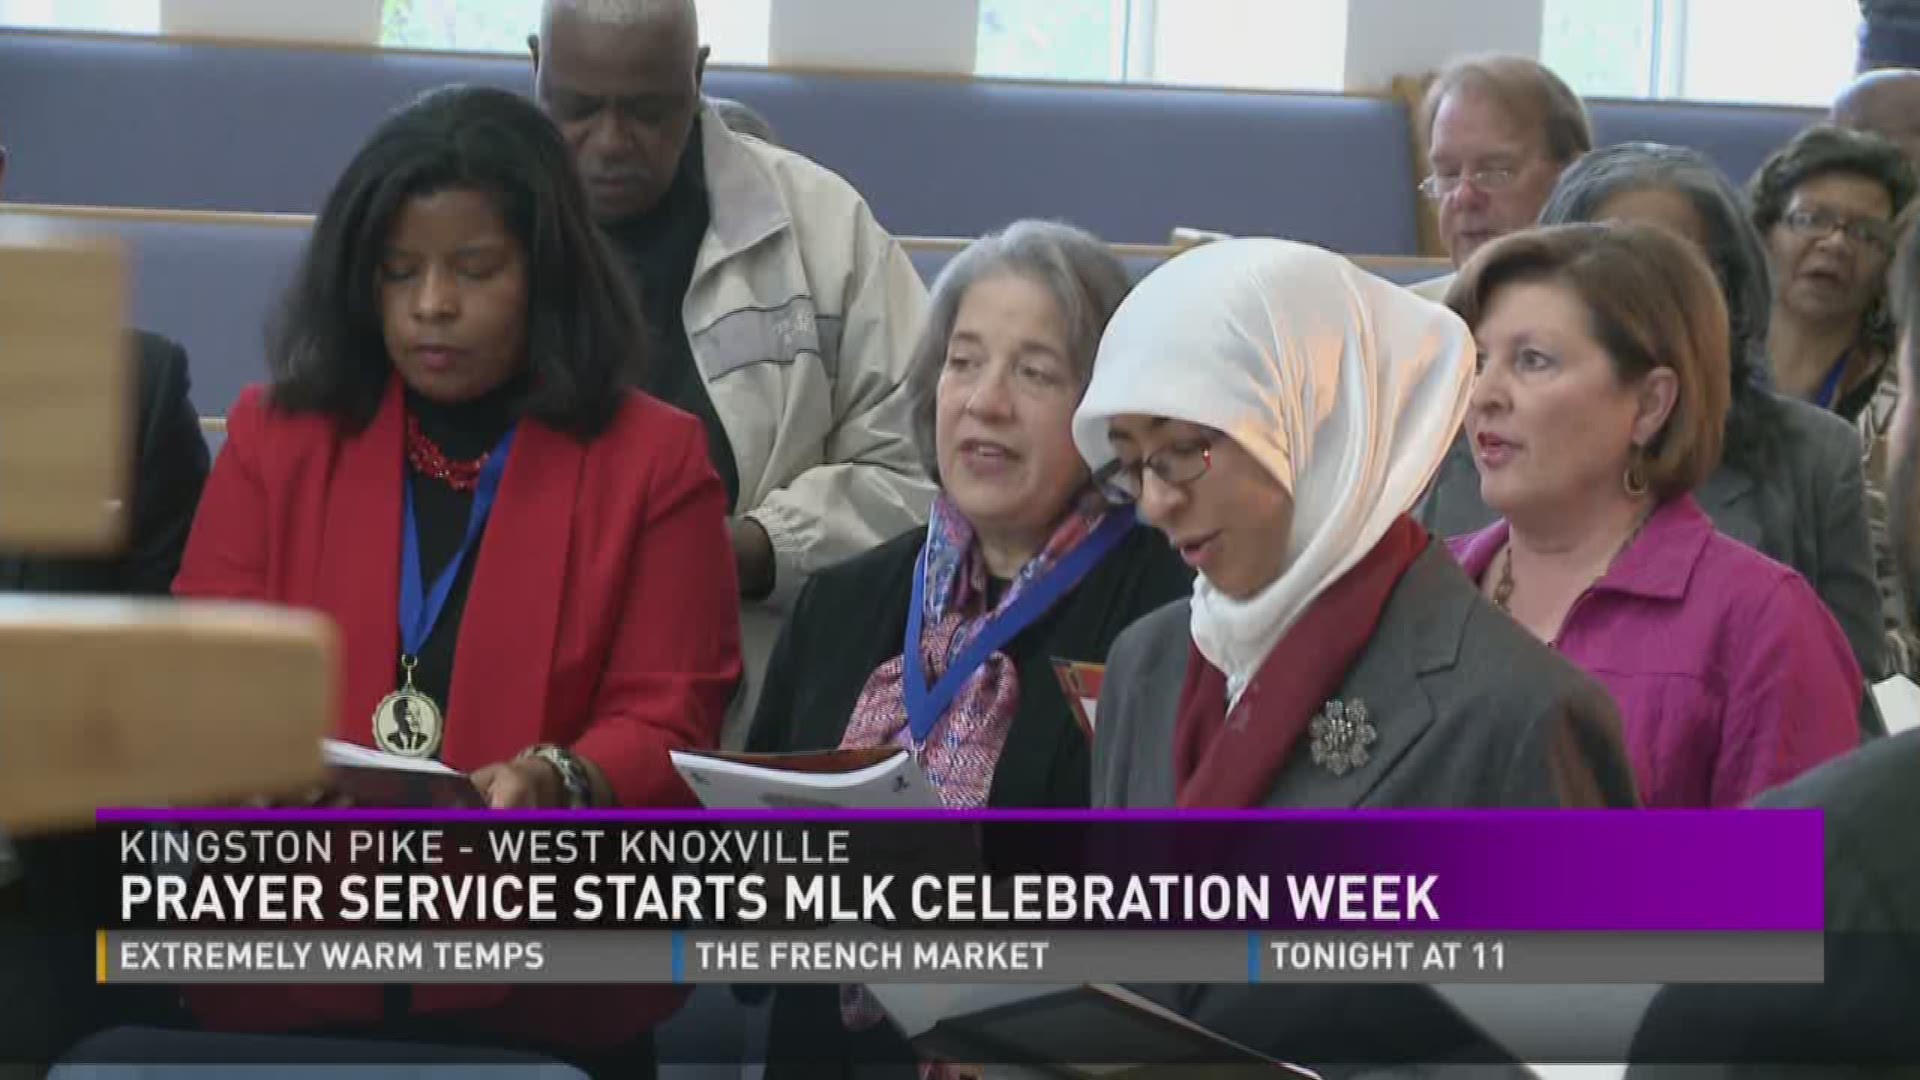 Leaders and congregants from several denominations held a prayer gathering in honor of Martin Luther King Jr.